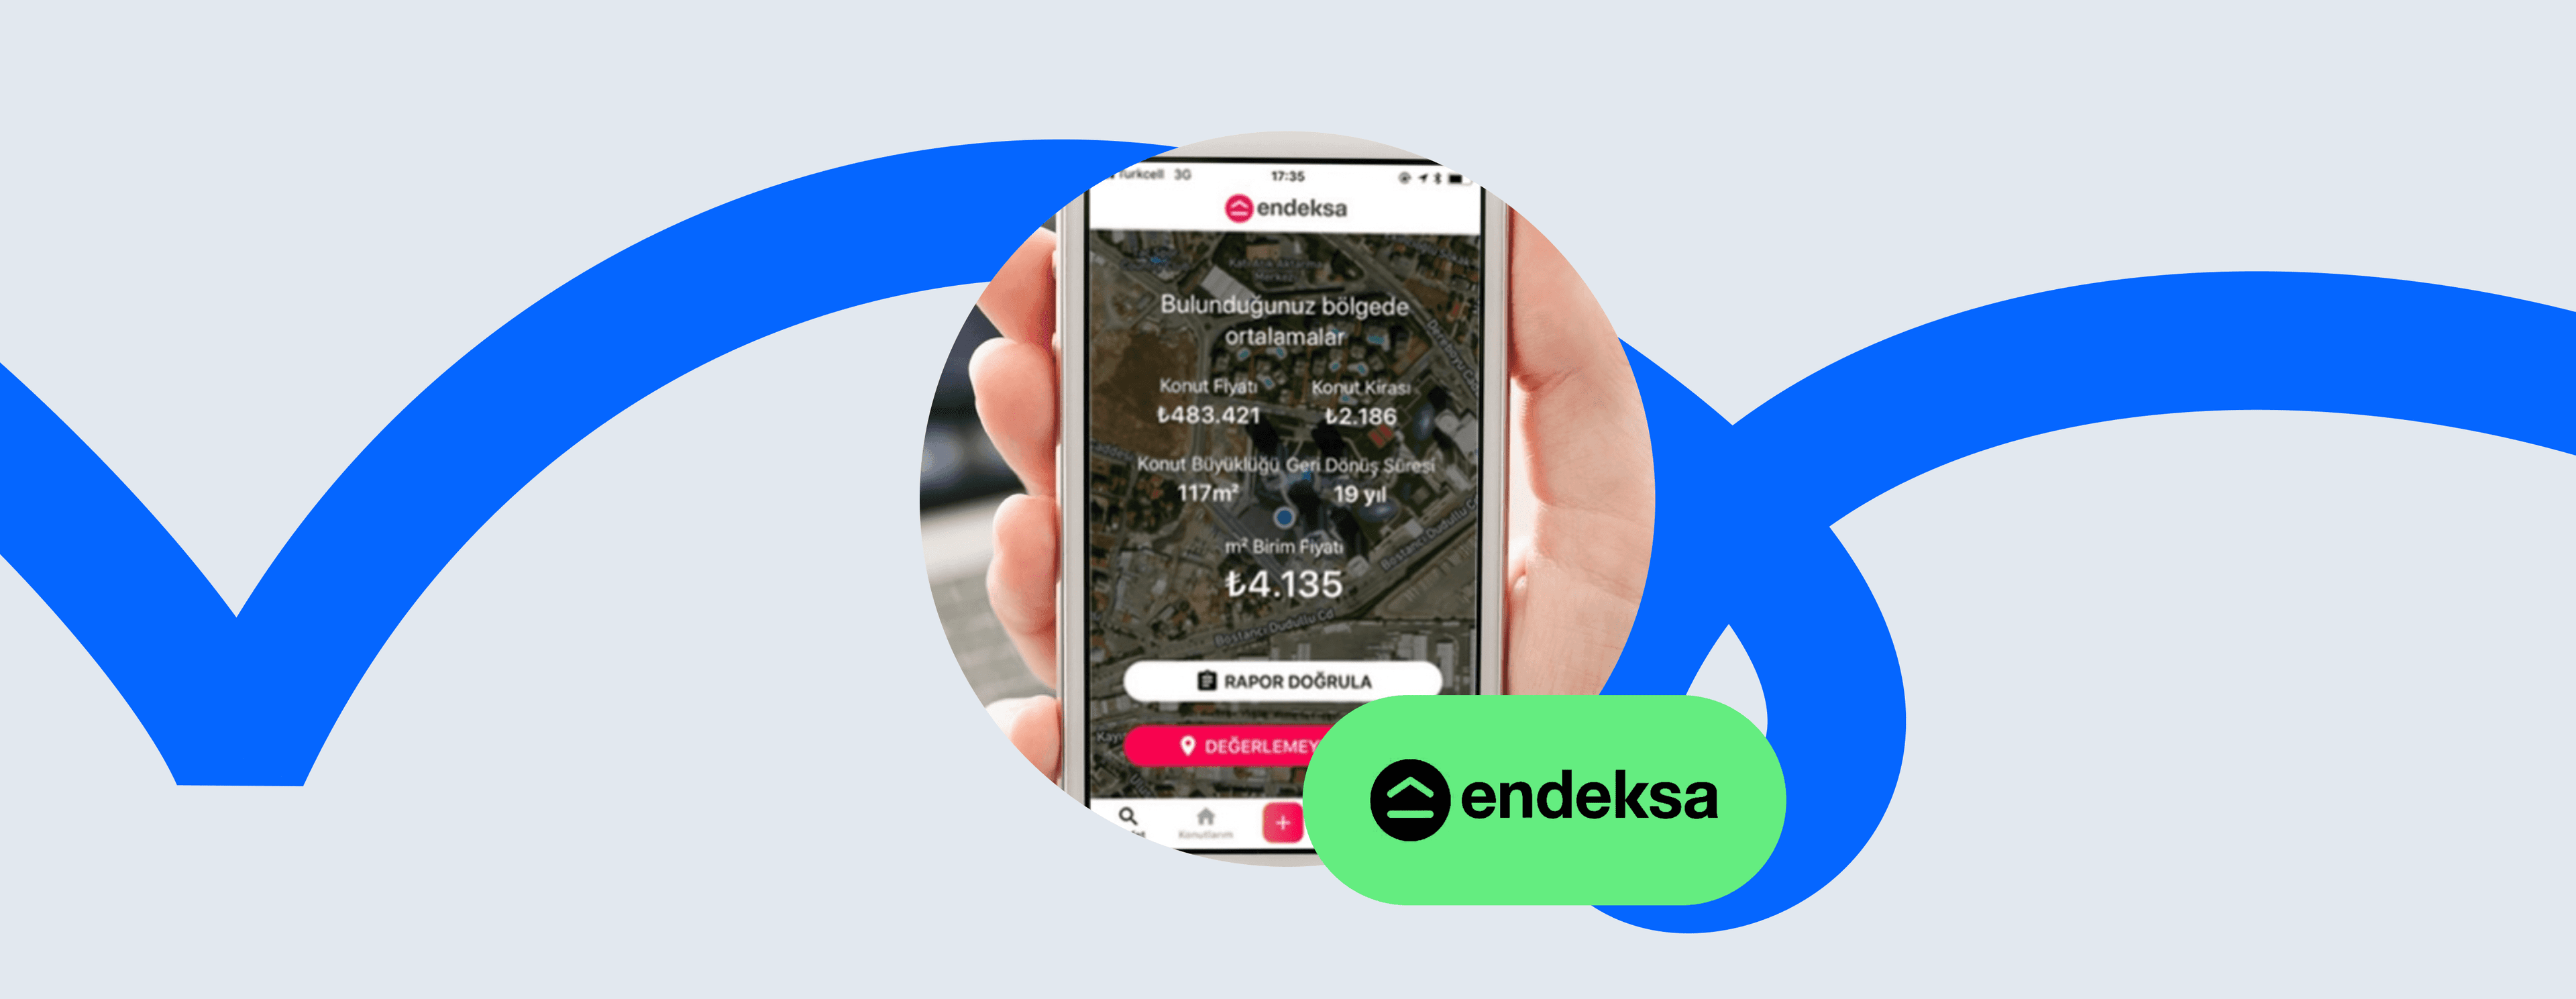 Endeksa Hits 138% Boost in Lead Generation with Tidio